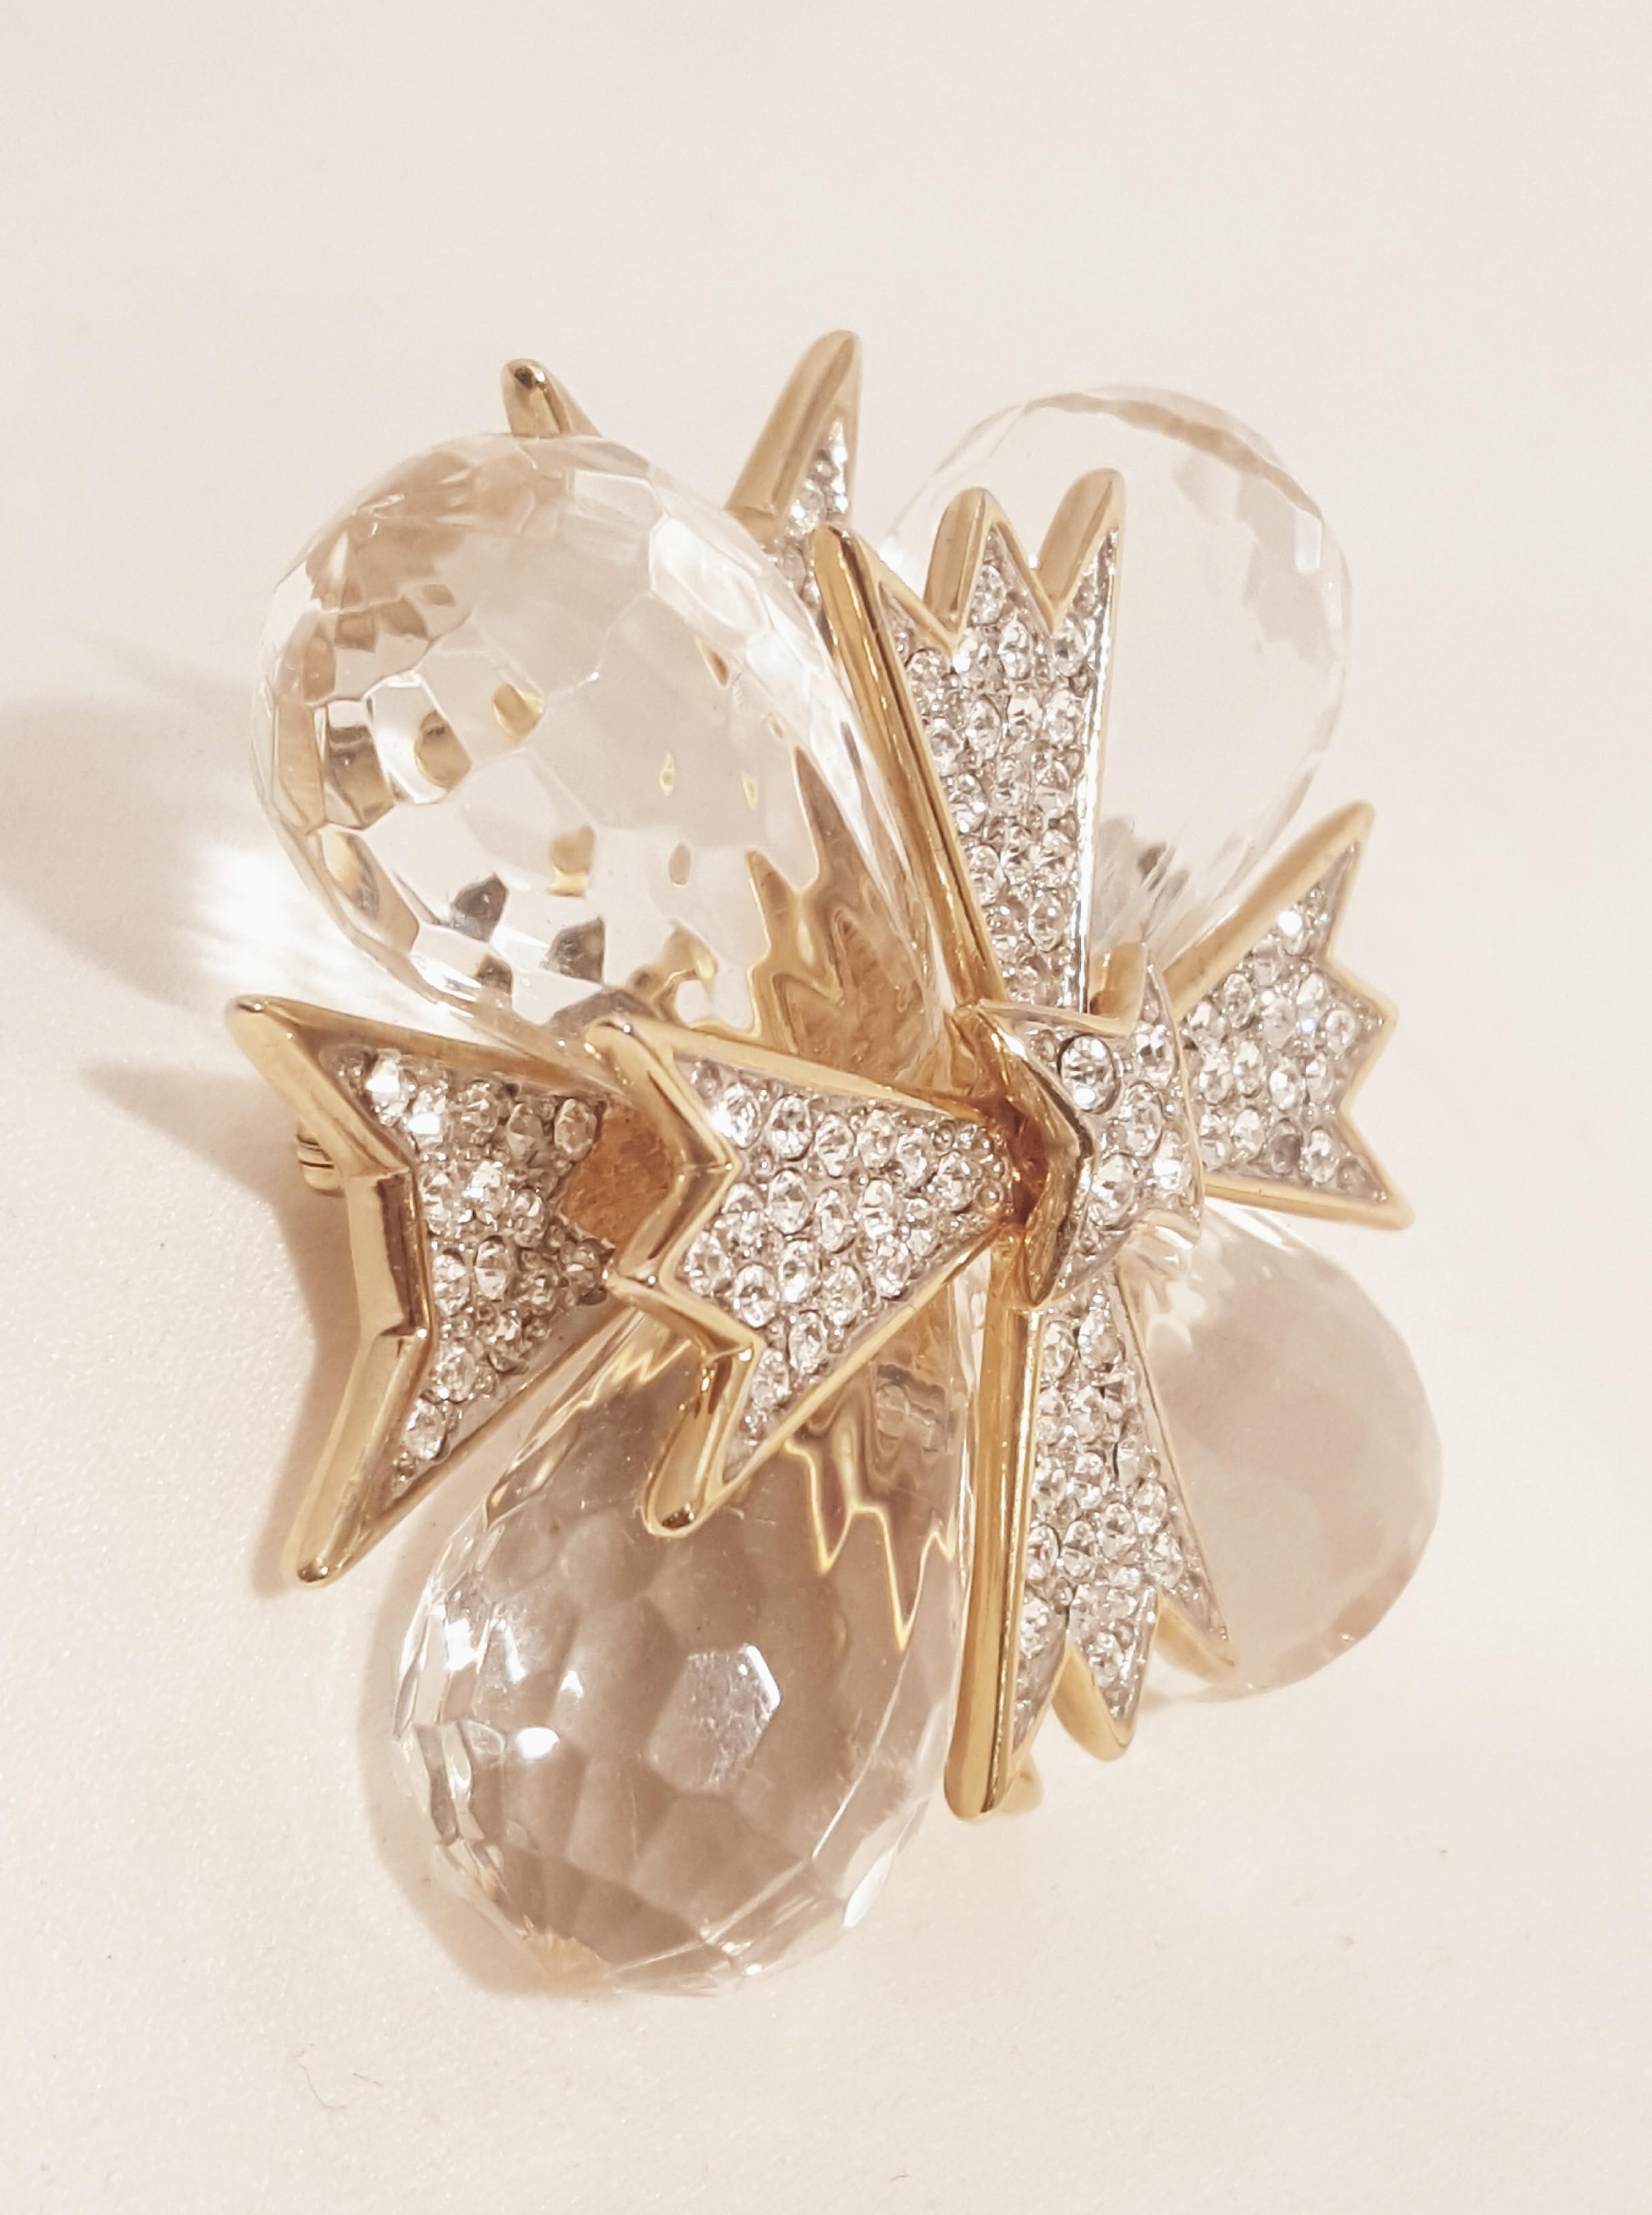 Kenneth Lane pieces, since his passing, have become highly collectible!  This fabulous brooch features two dimensional design with an upper and lower level.  Corners are strikingly stunning lucite briolettes.  Focal point is a Maltese cross